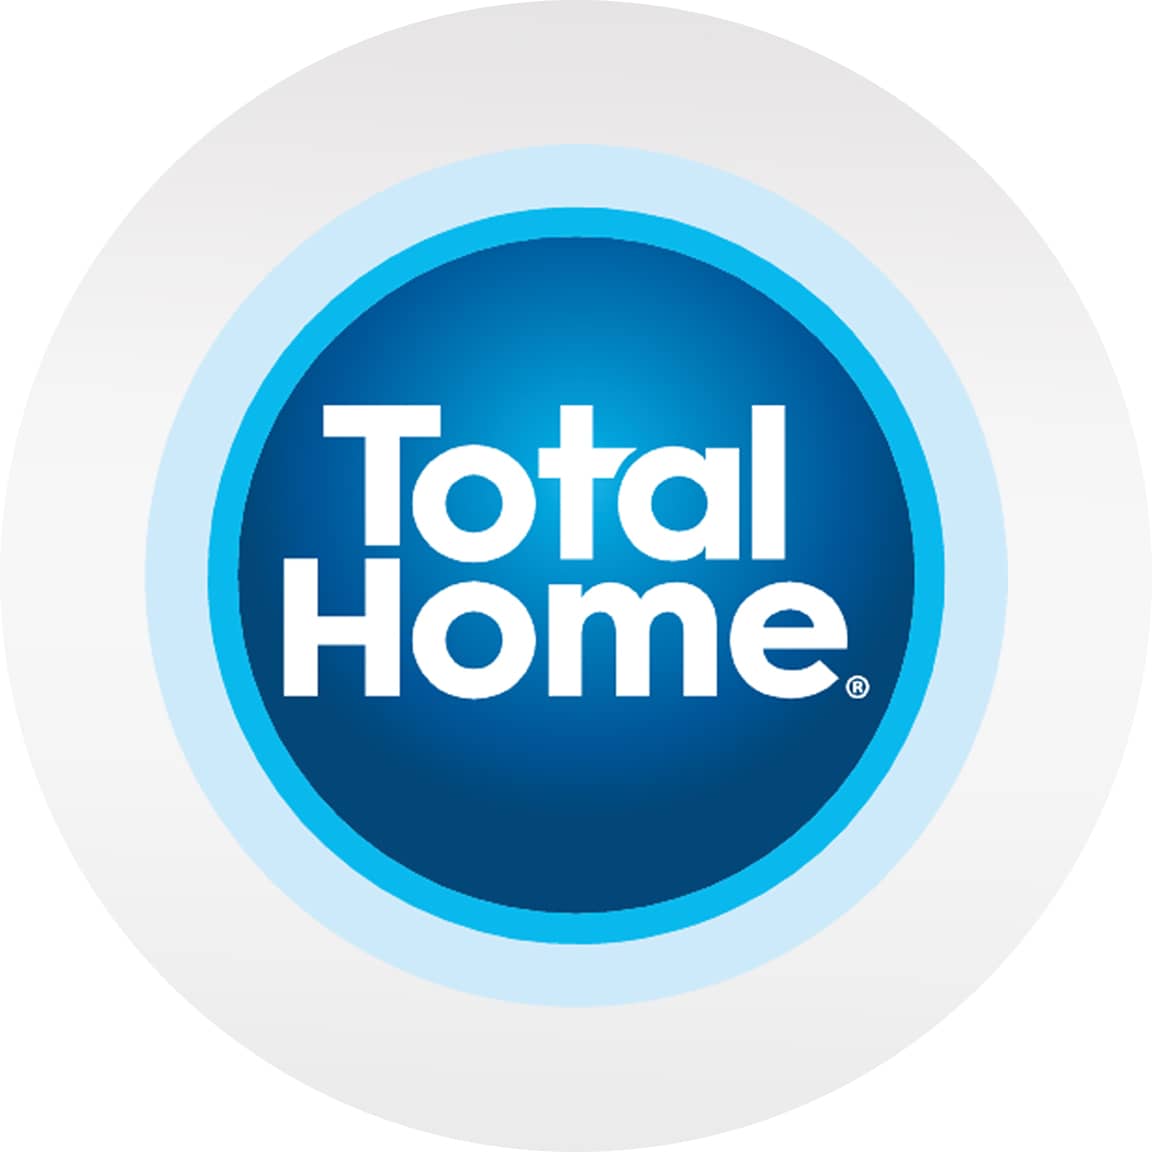 Shop for Total Home® brand products